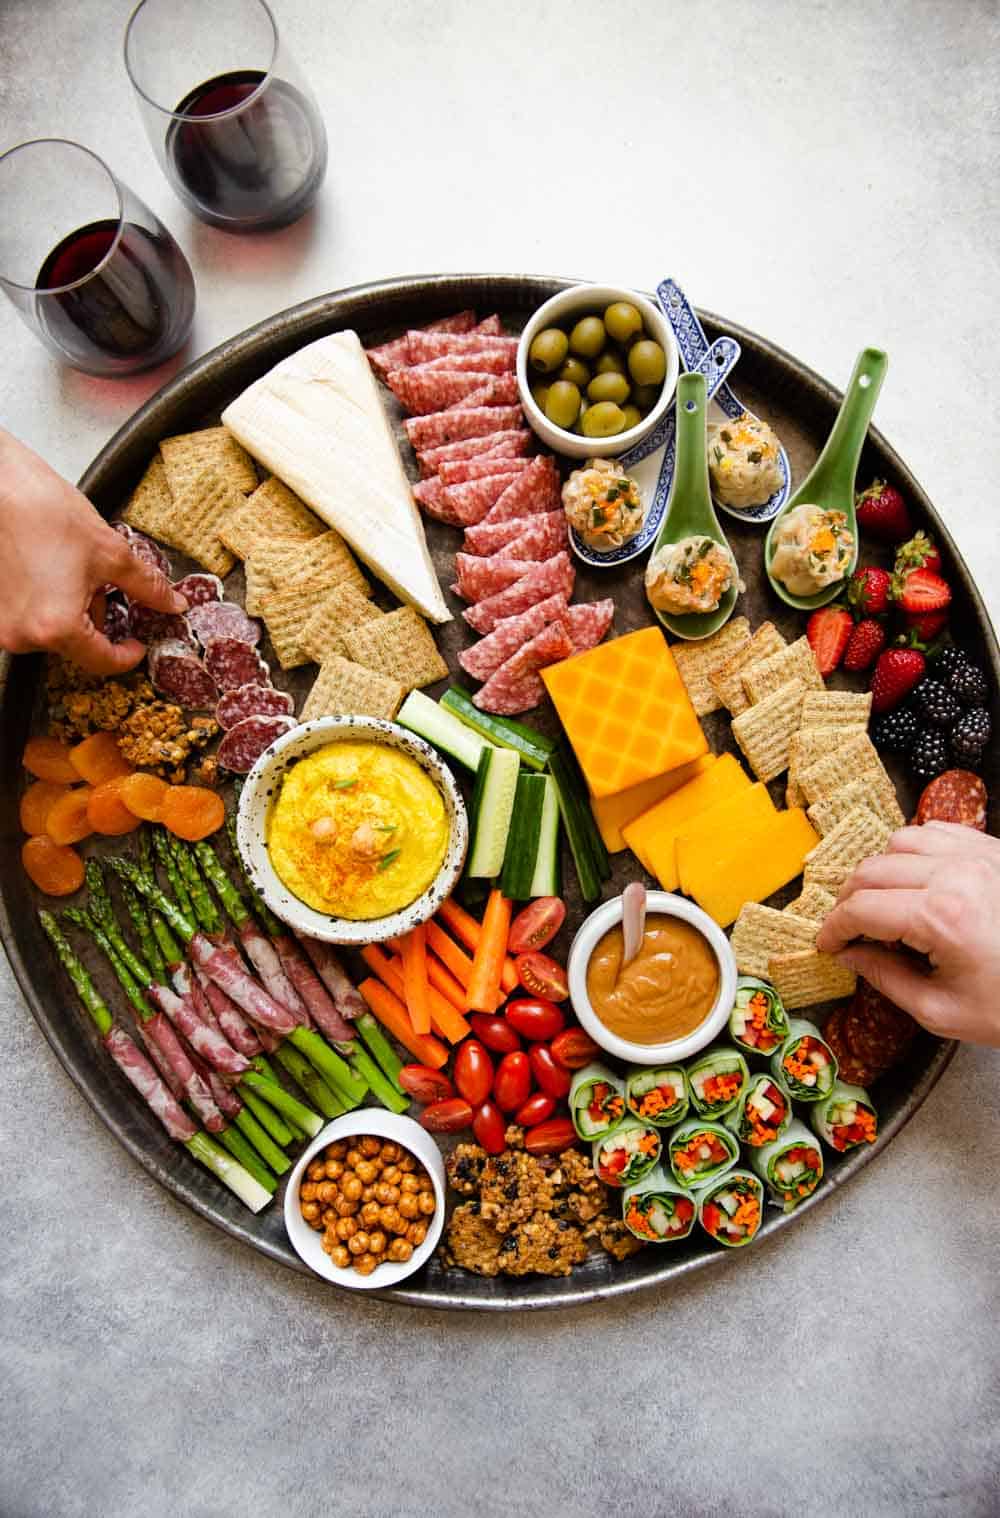 How to Build a Grazing Platter